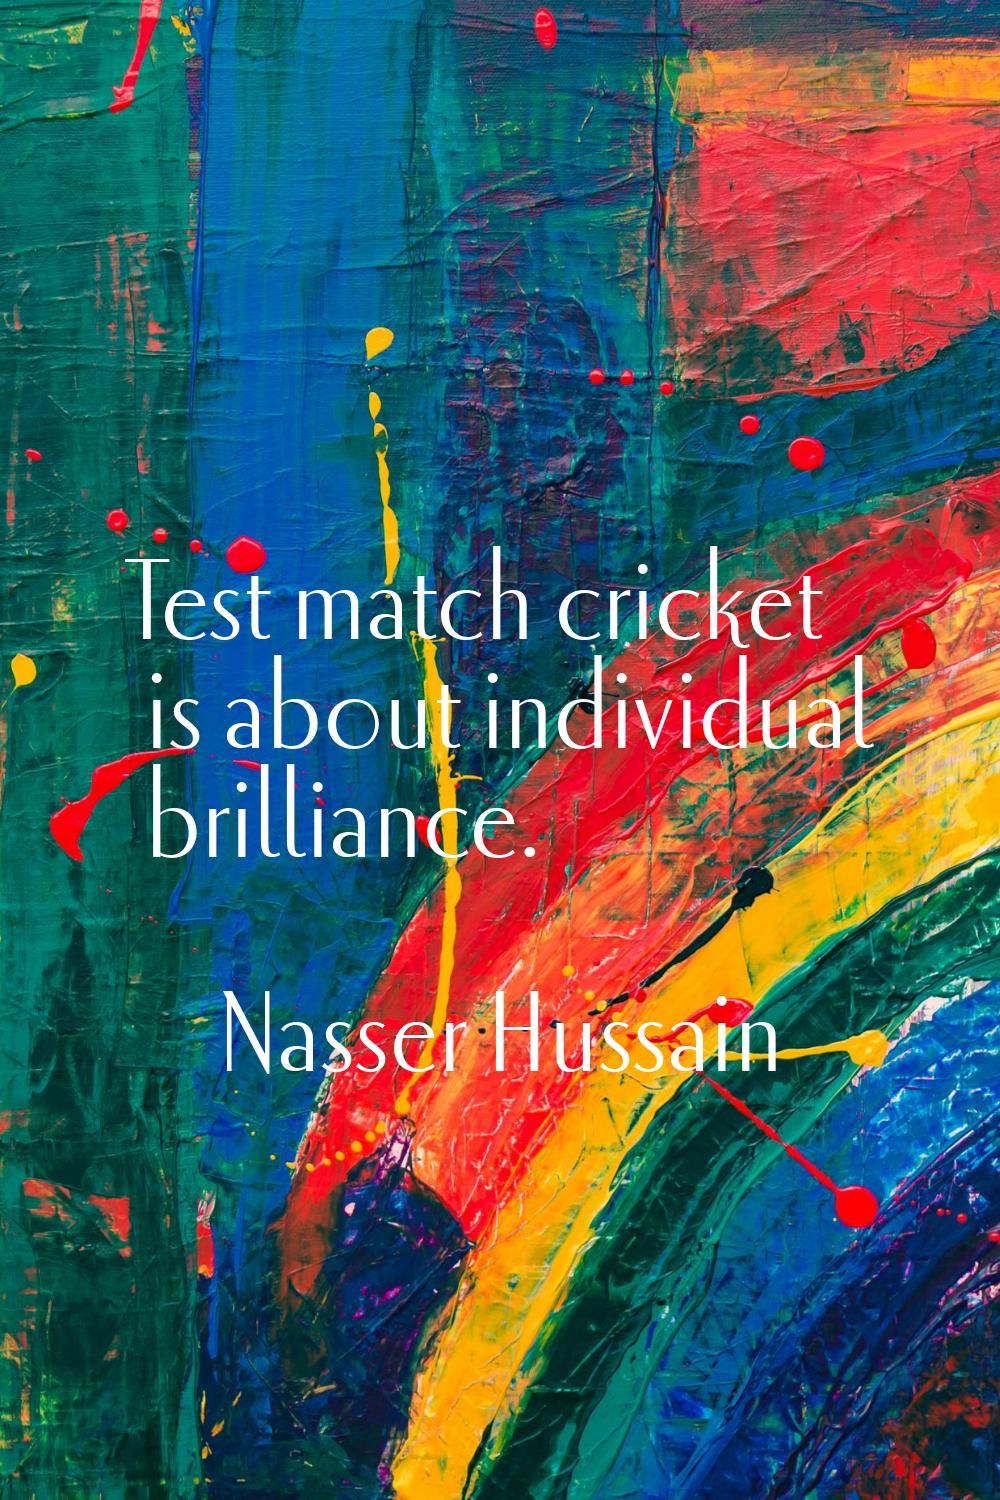 Test match cricket is about individual brilliance.